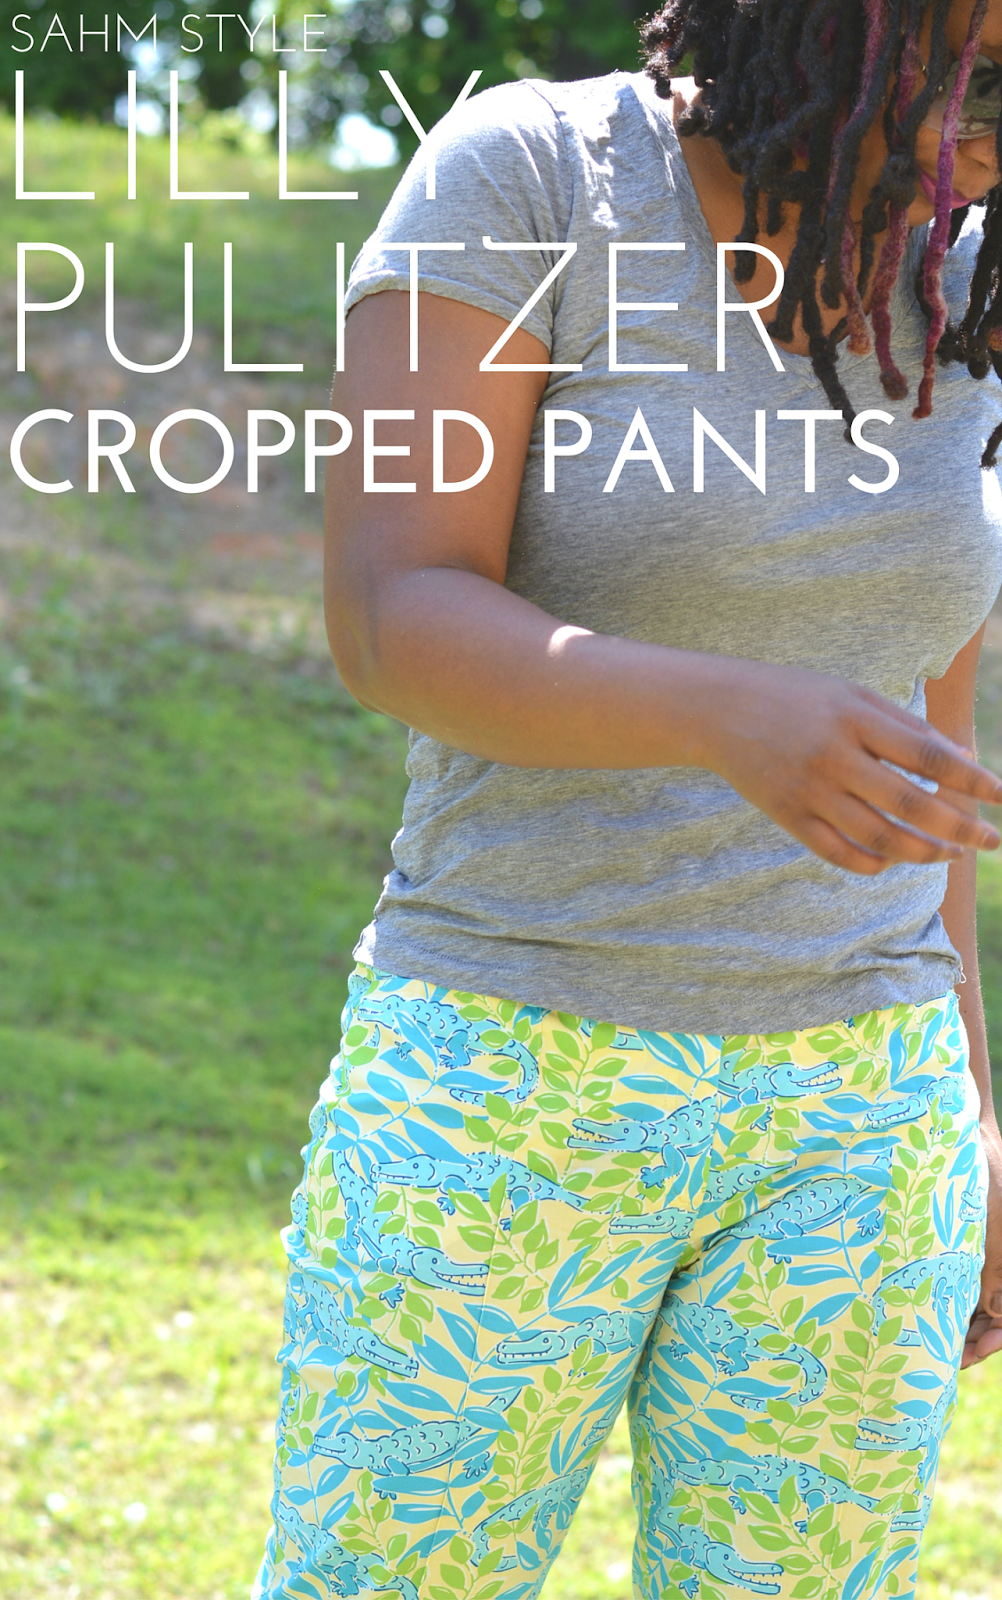 lilly pulitzer cropped pants